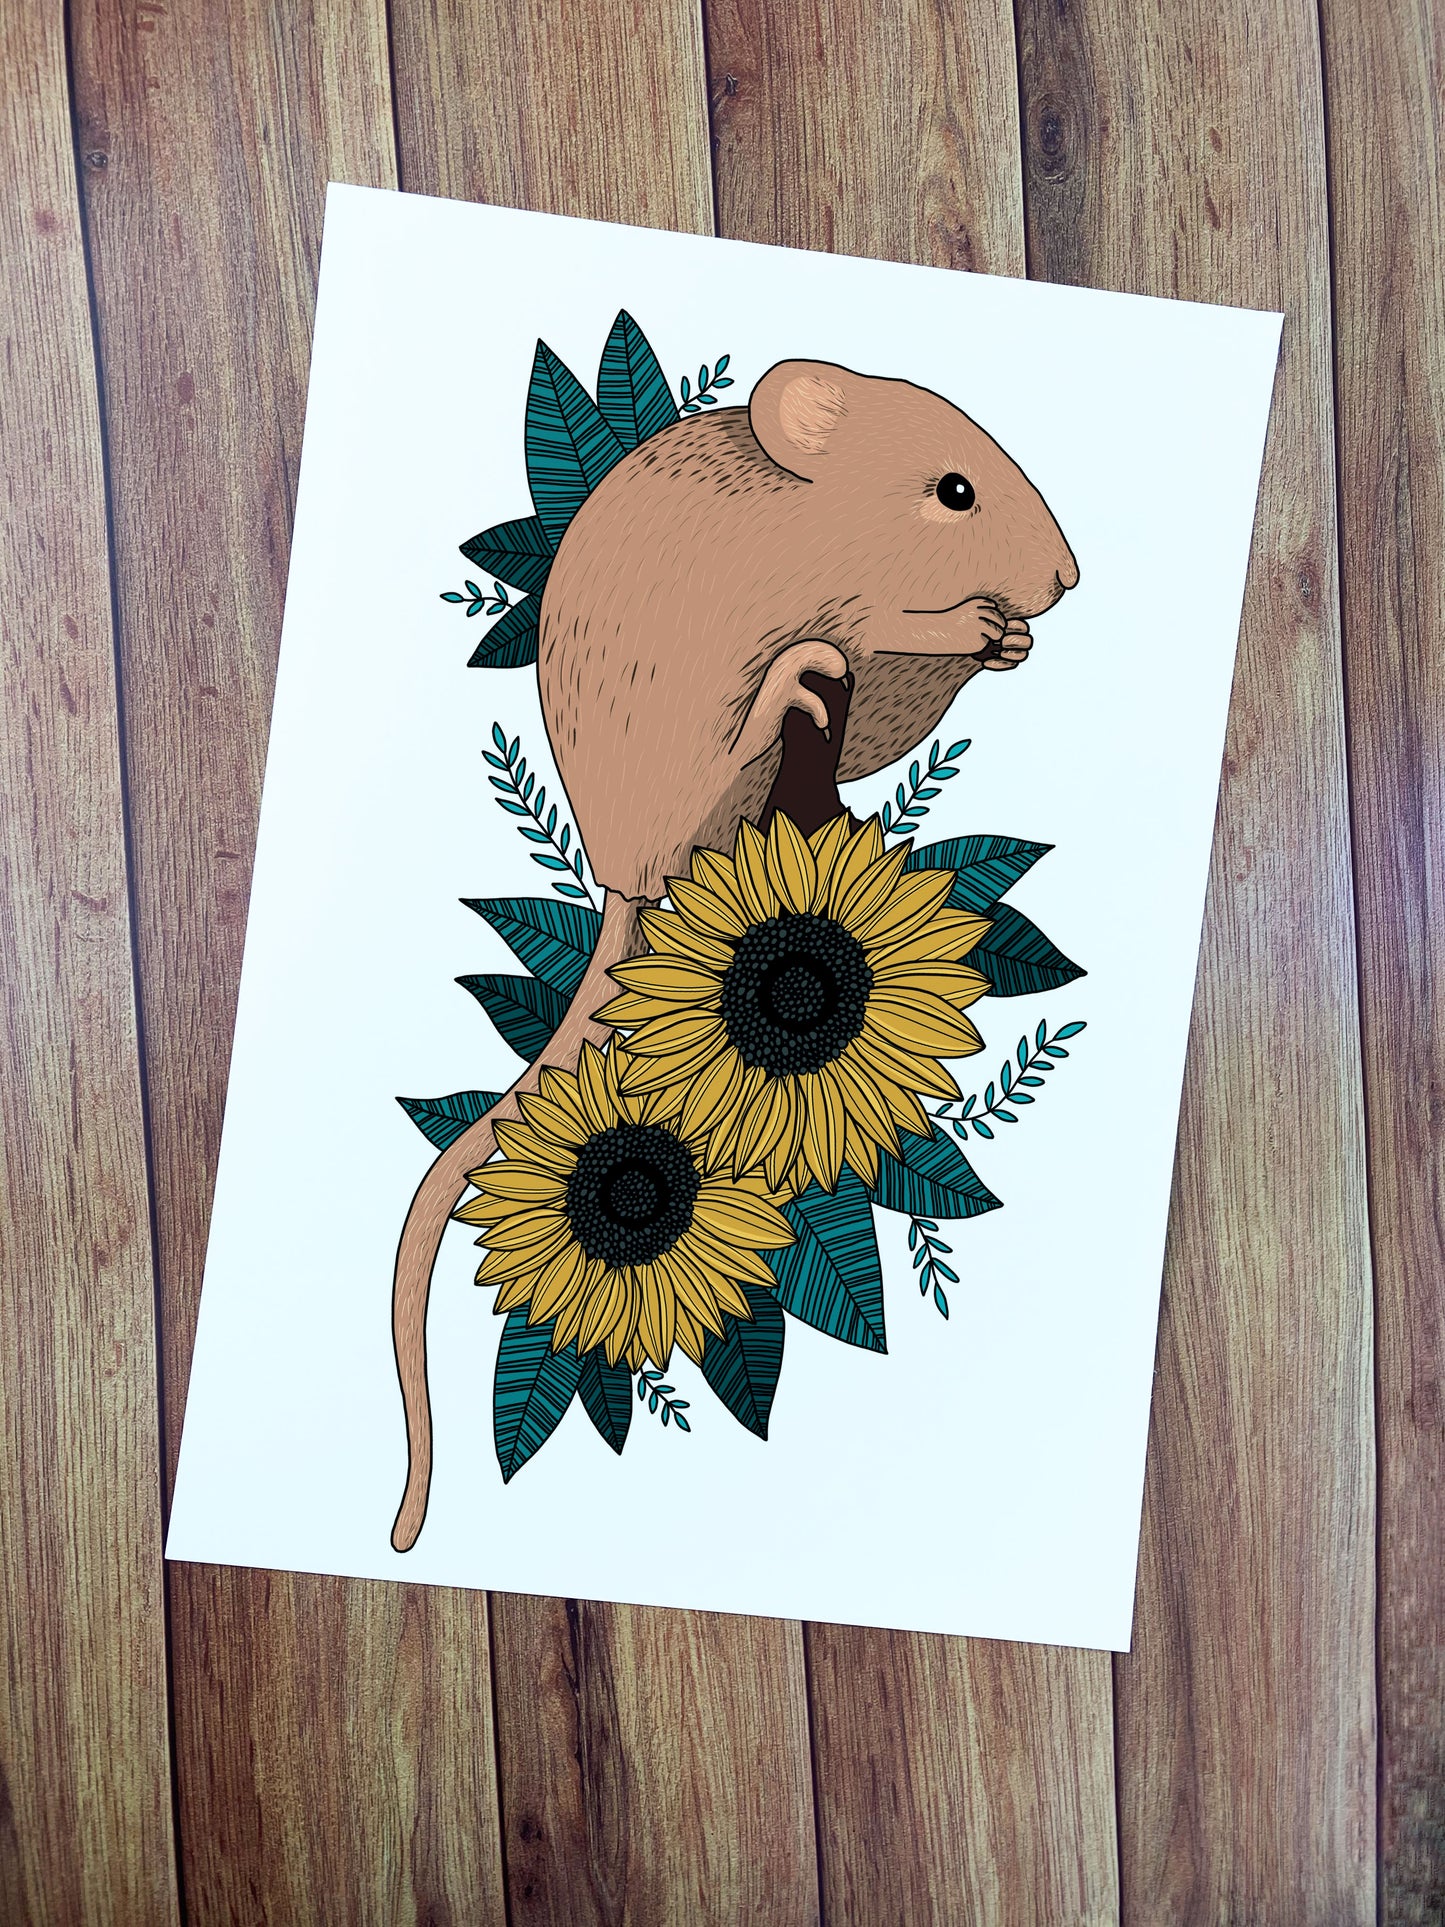 art print of a dormouse and sunflowers illustrated digitally shown flat on wood